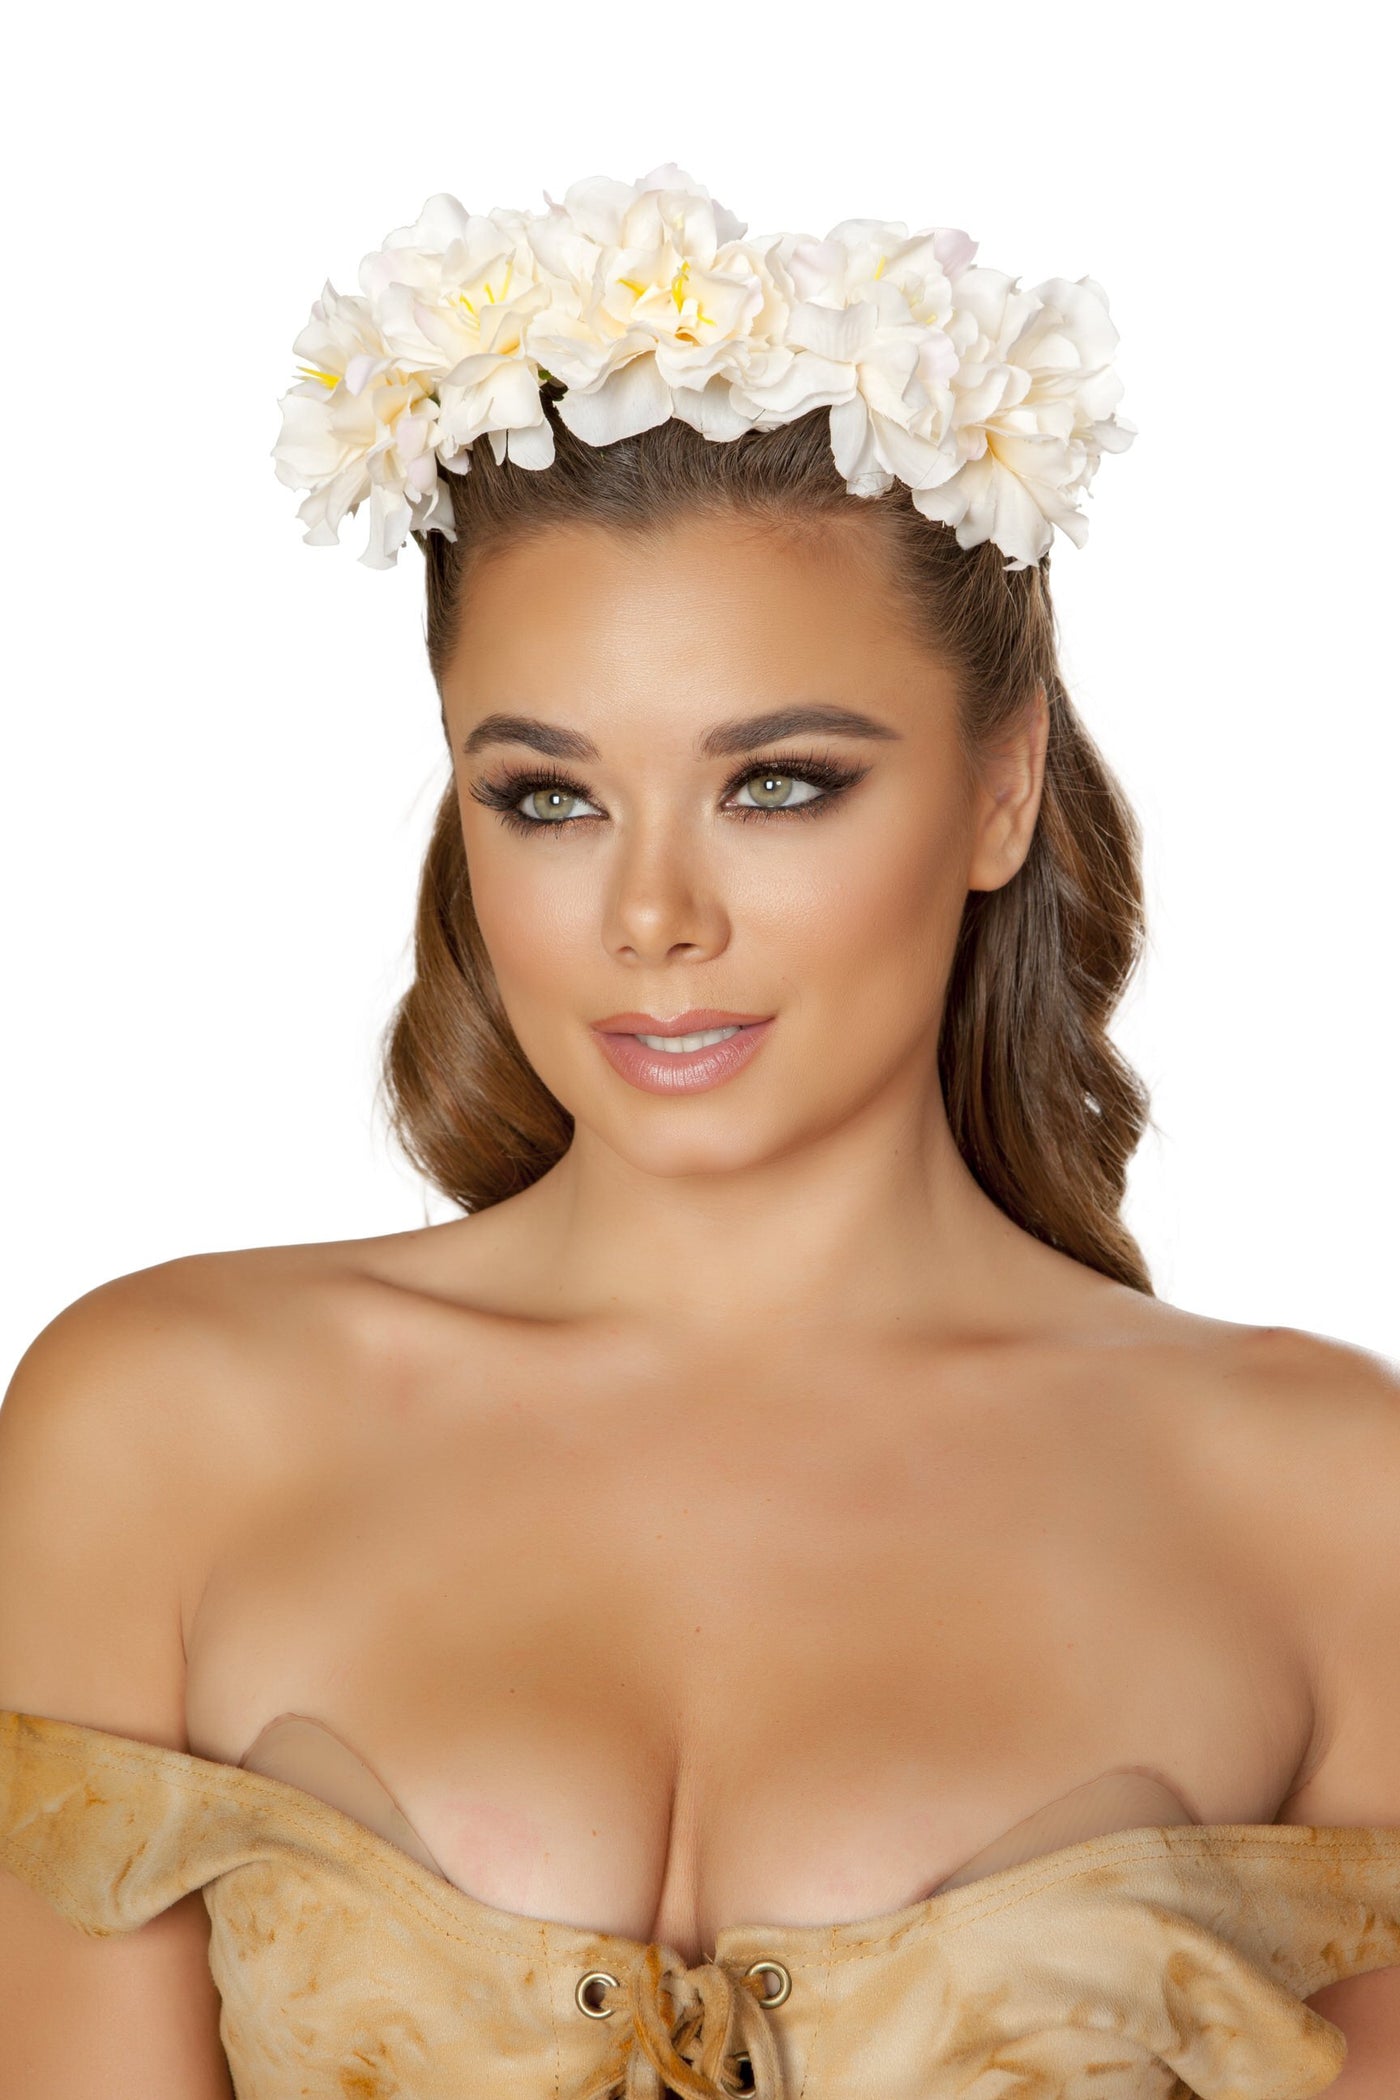 Buy Large Floral Headband from RomaRetailShop for 11.25 with Same Day Shipping Designed by Roma Costume 3630-AS-O/S